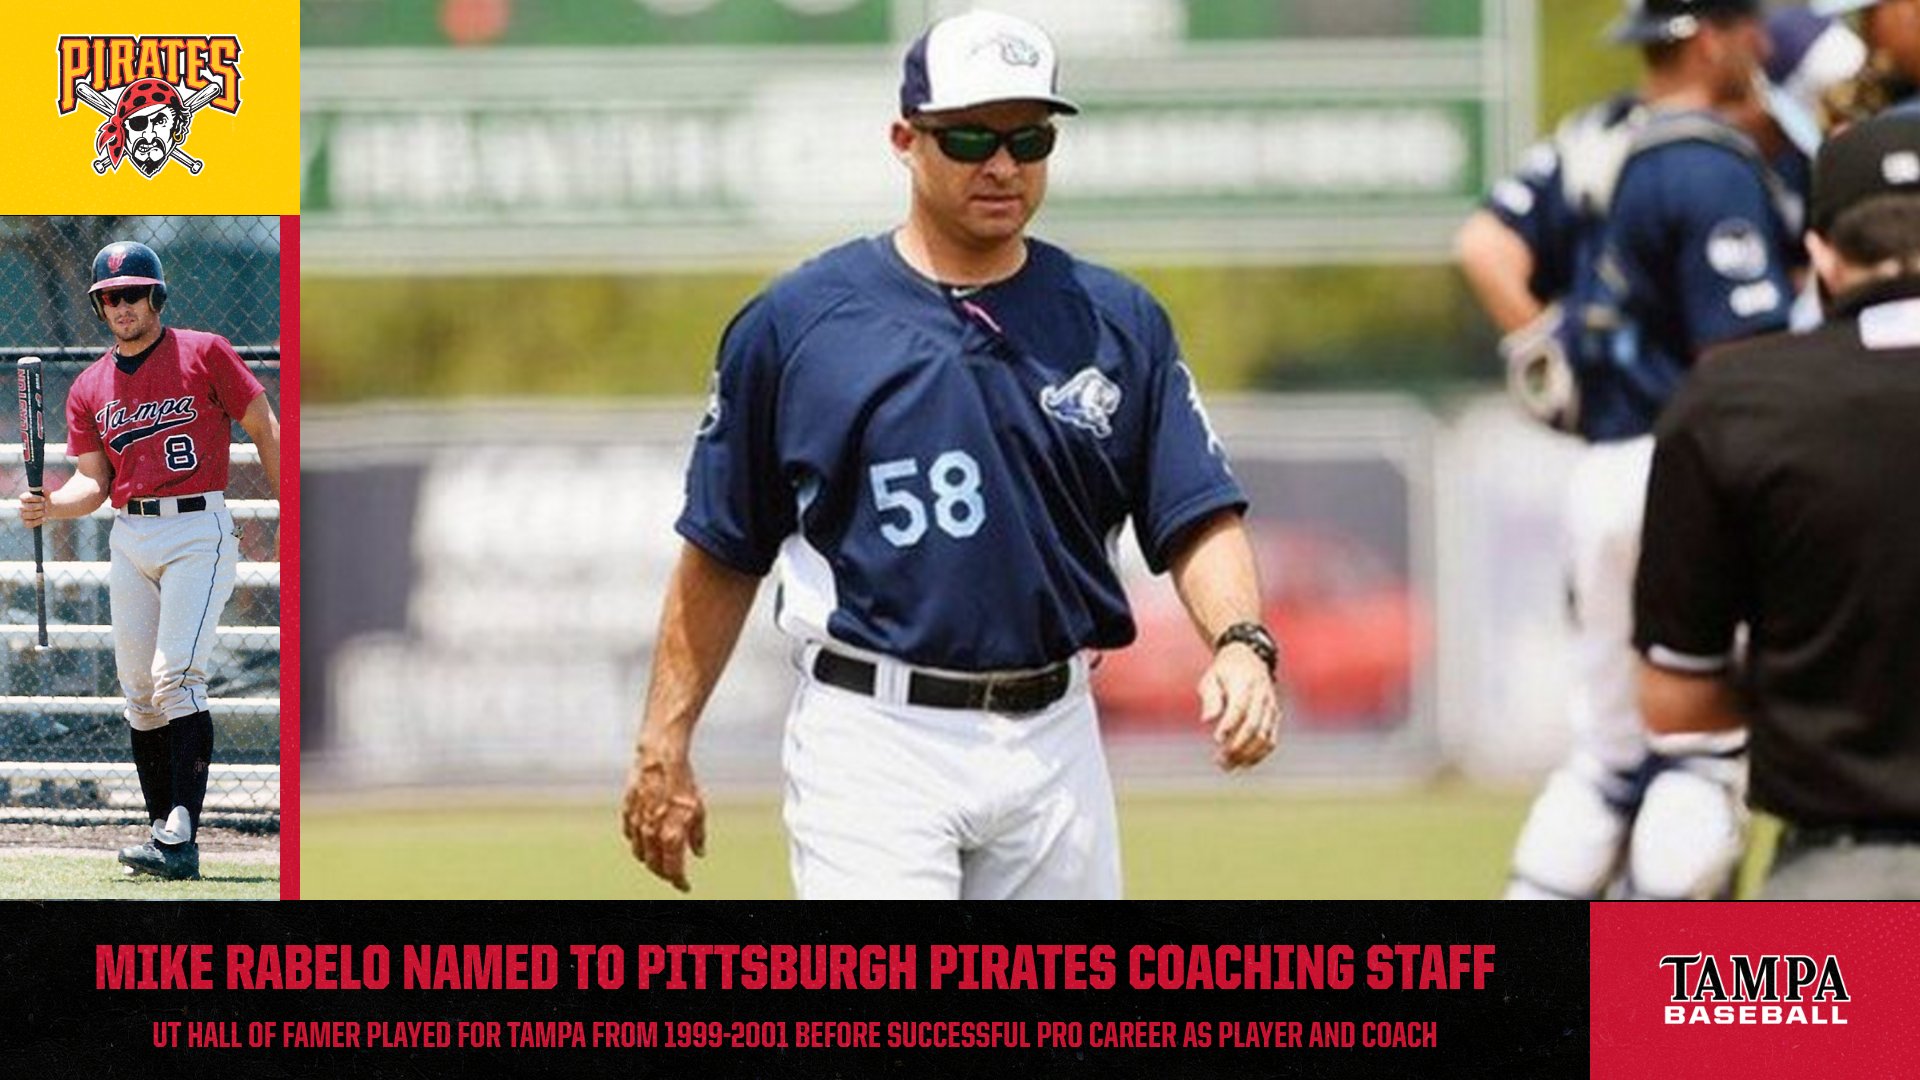 Former Spartan Standout Mike Rabelo Named to Pittsburgh Pirates Coaching Staff